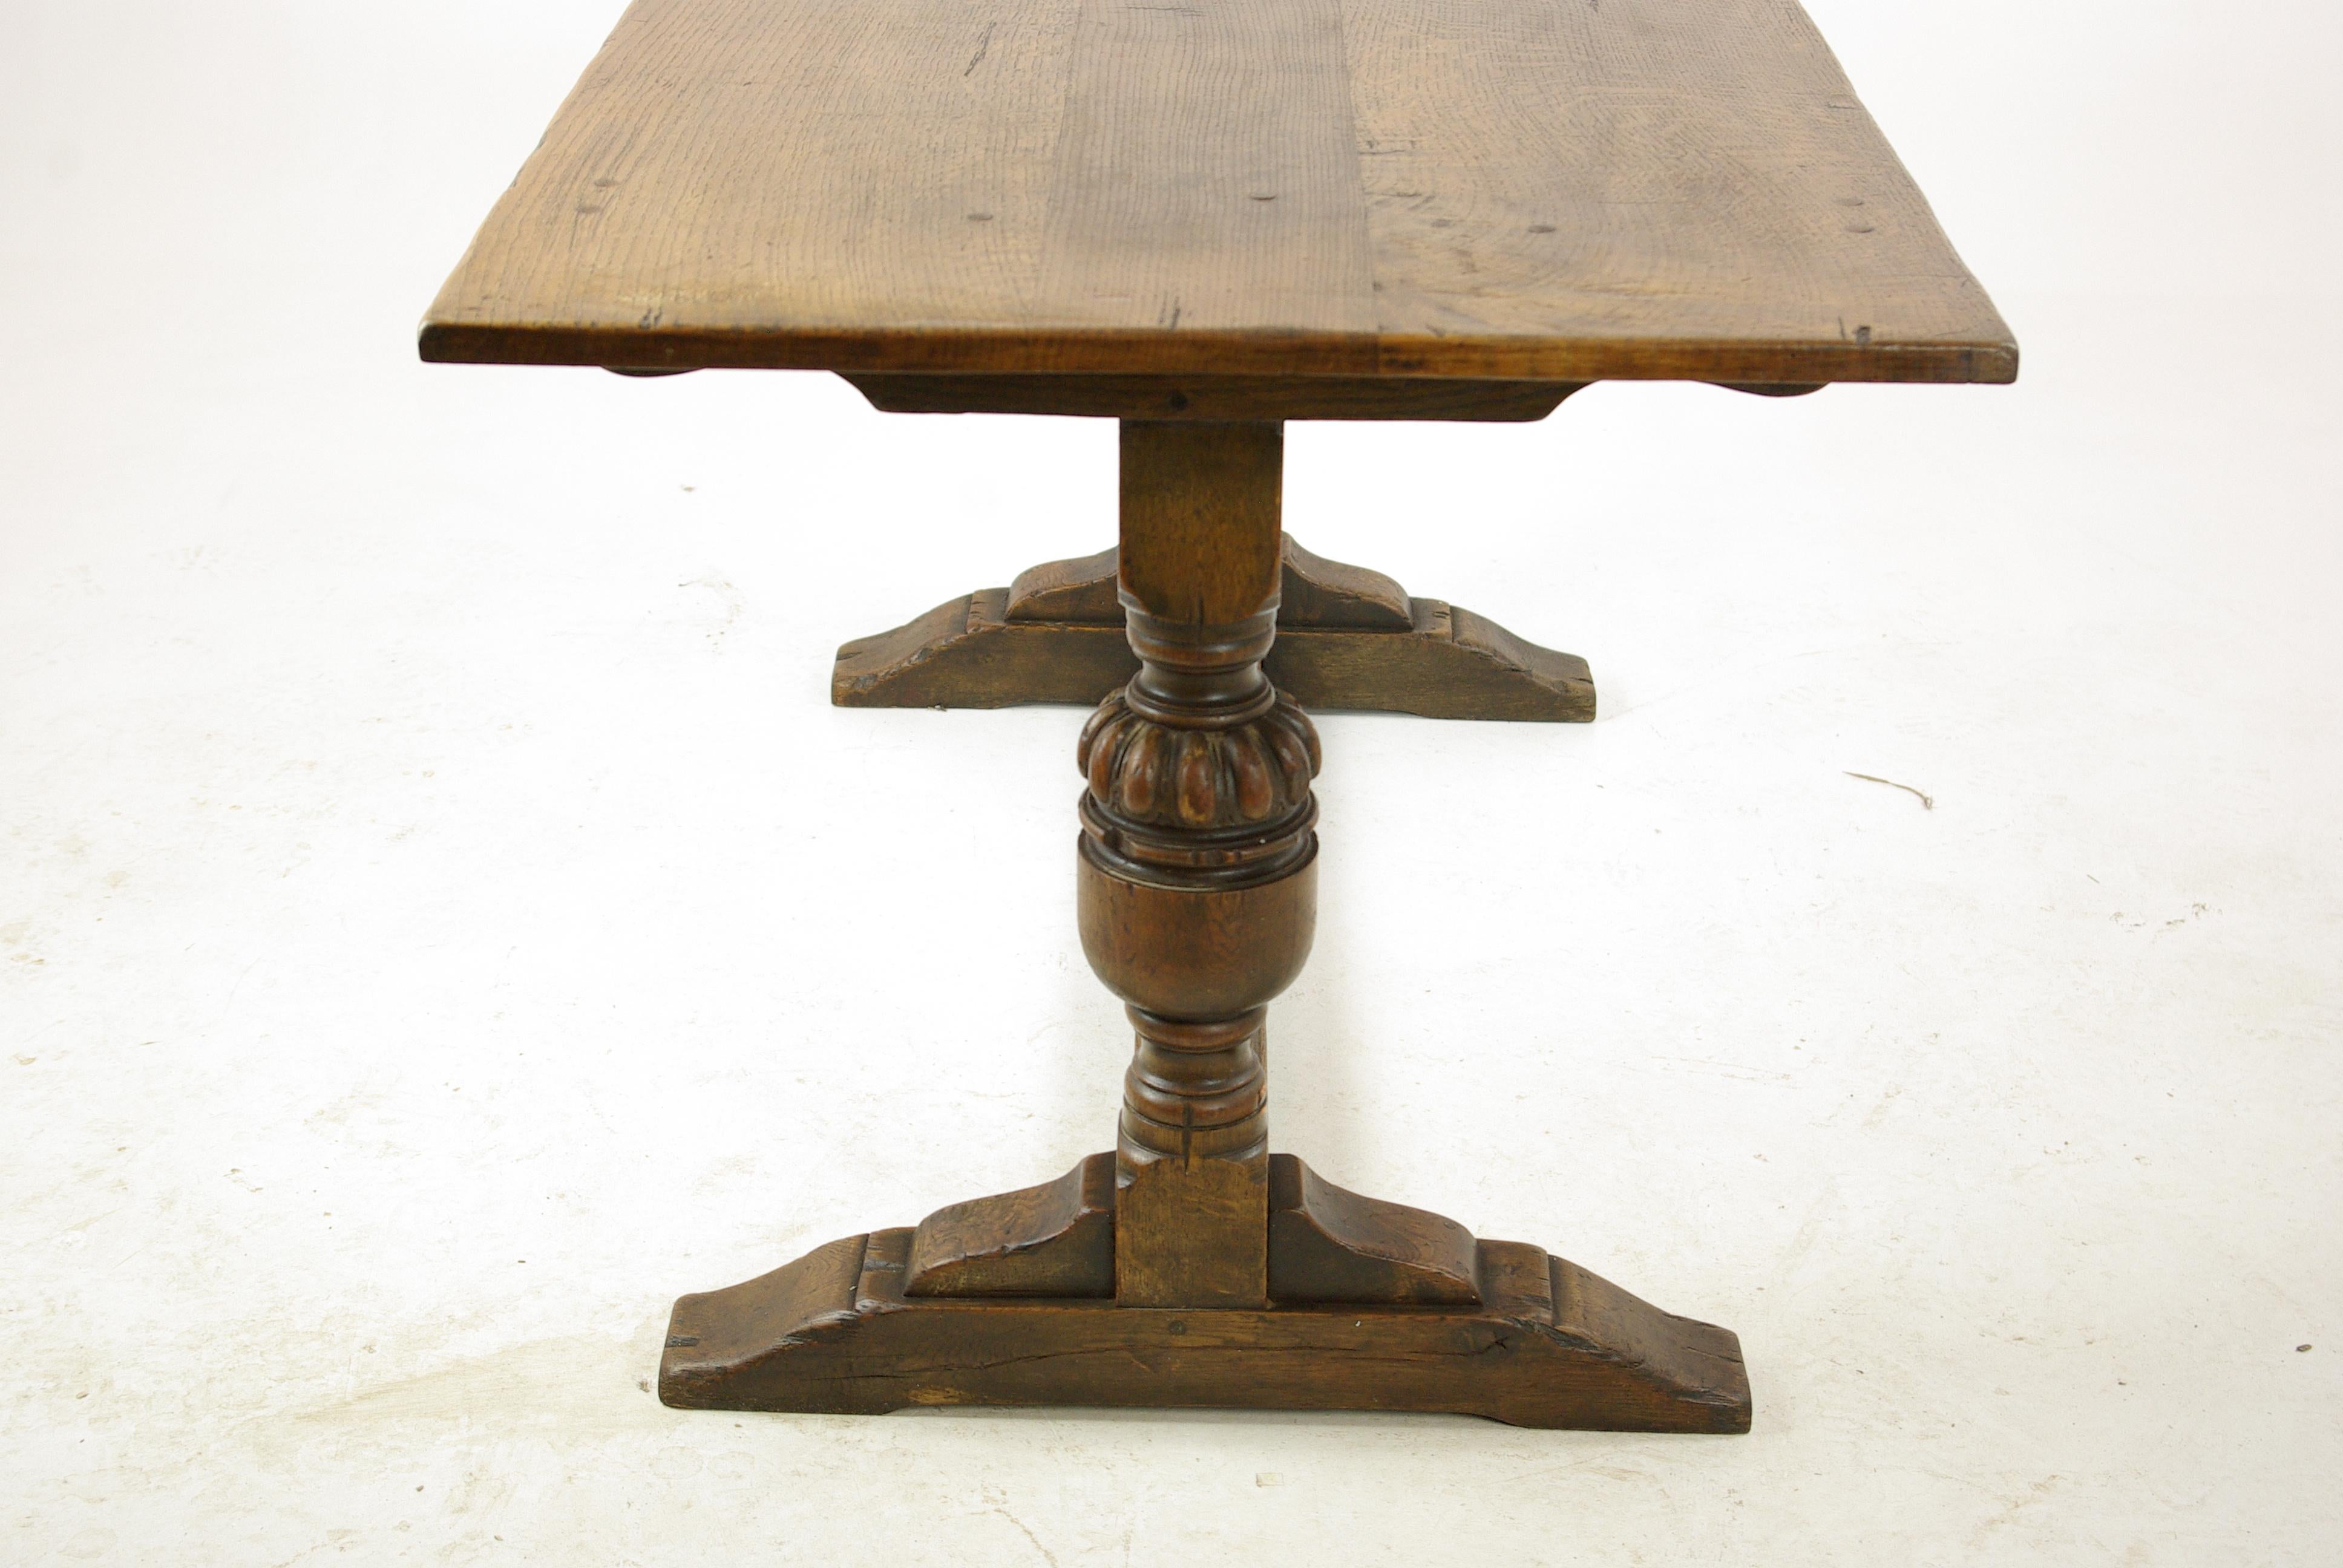 Antique oak table, antique tiger oak farm house refectory table with baluster supports, Scotland 1920s, Antique Furniture, B1277

Scotland 1920s
Solid oak construction w.o.f. 
Three plank moulded and pegged top
All supported by two thick carved